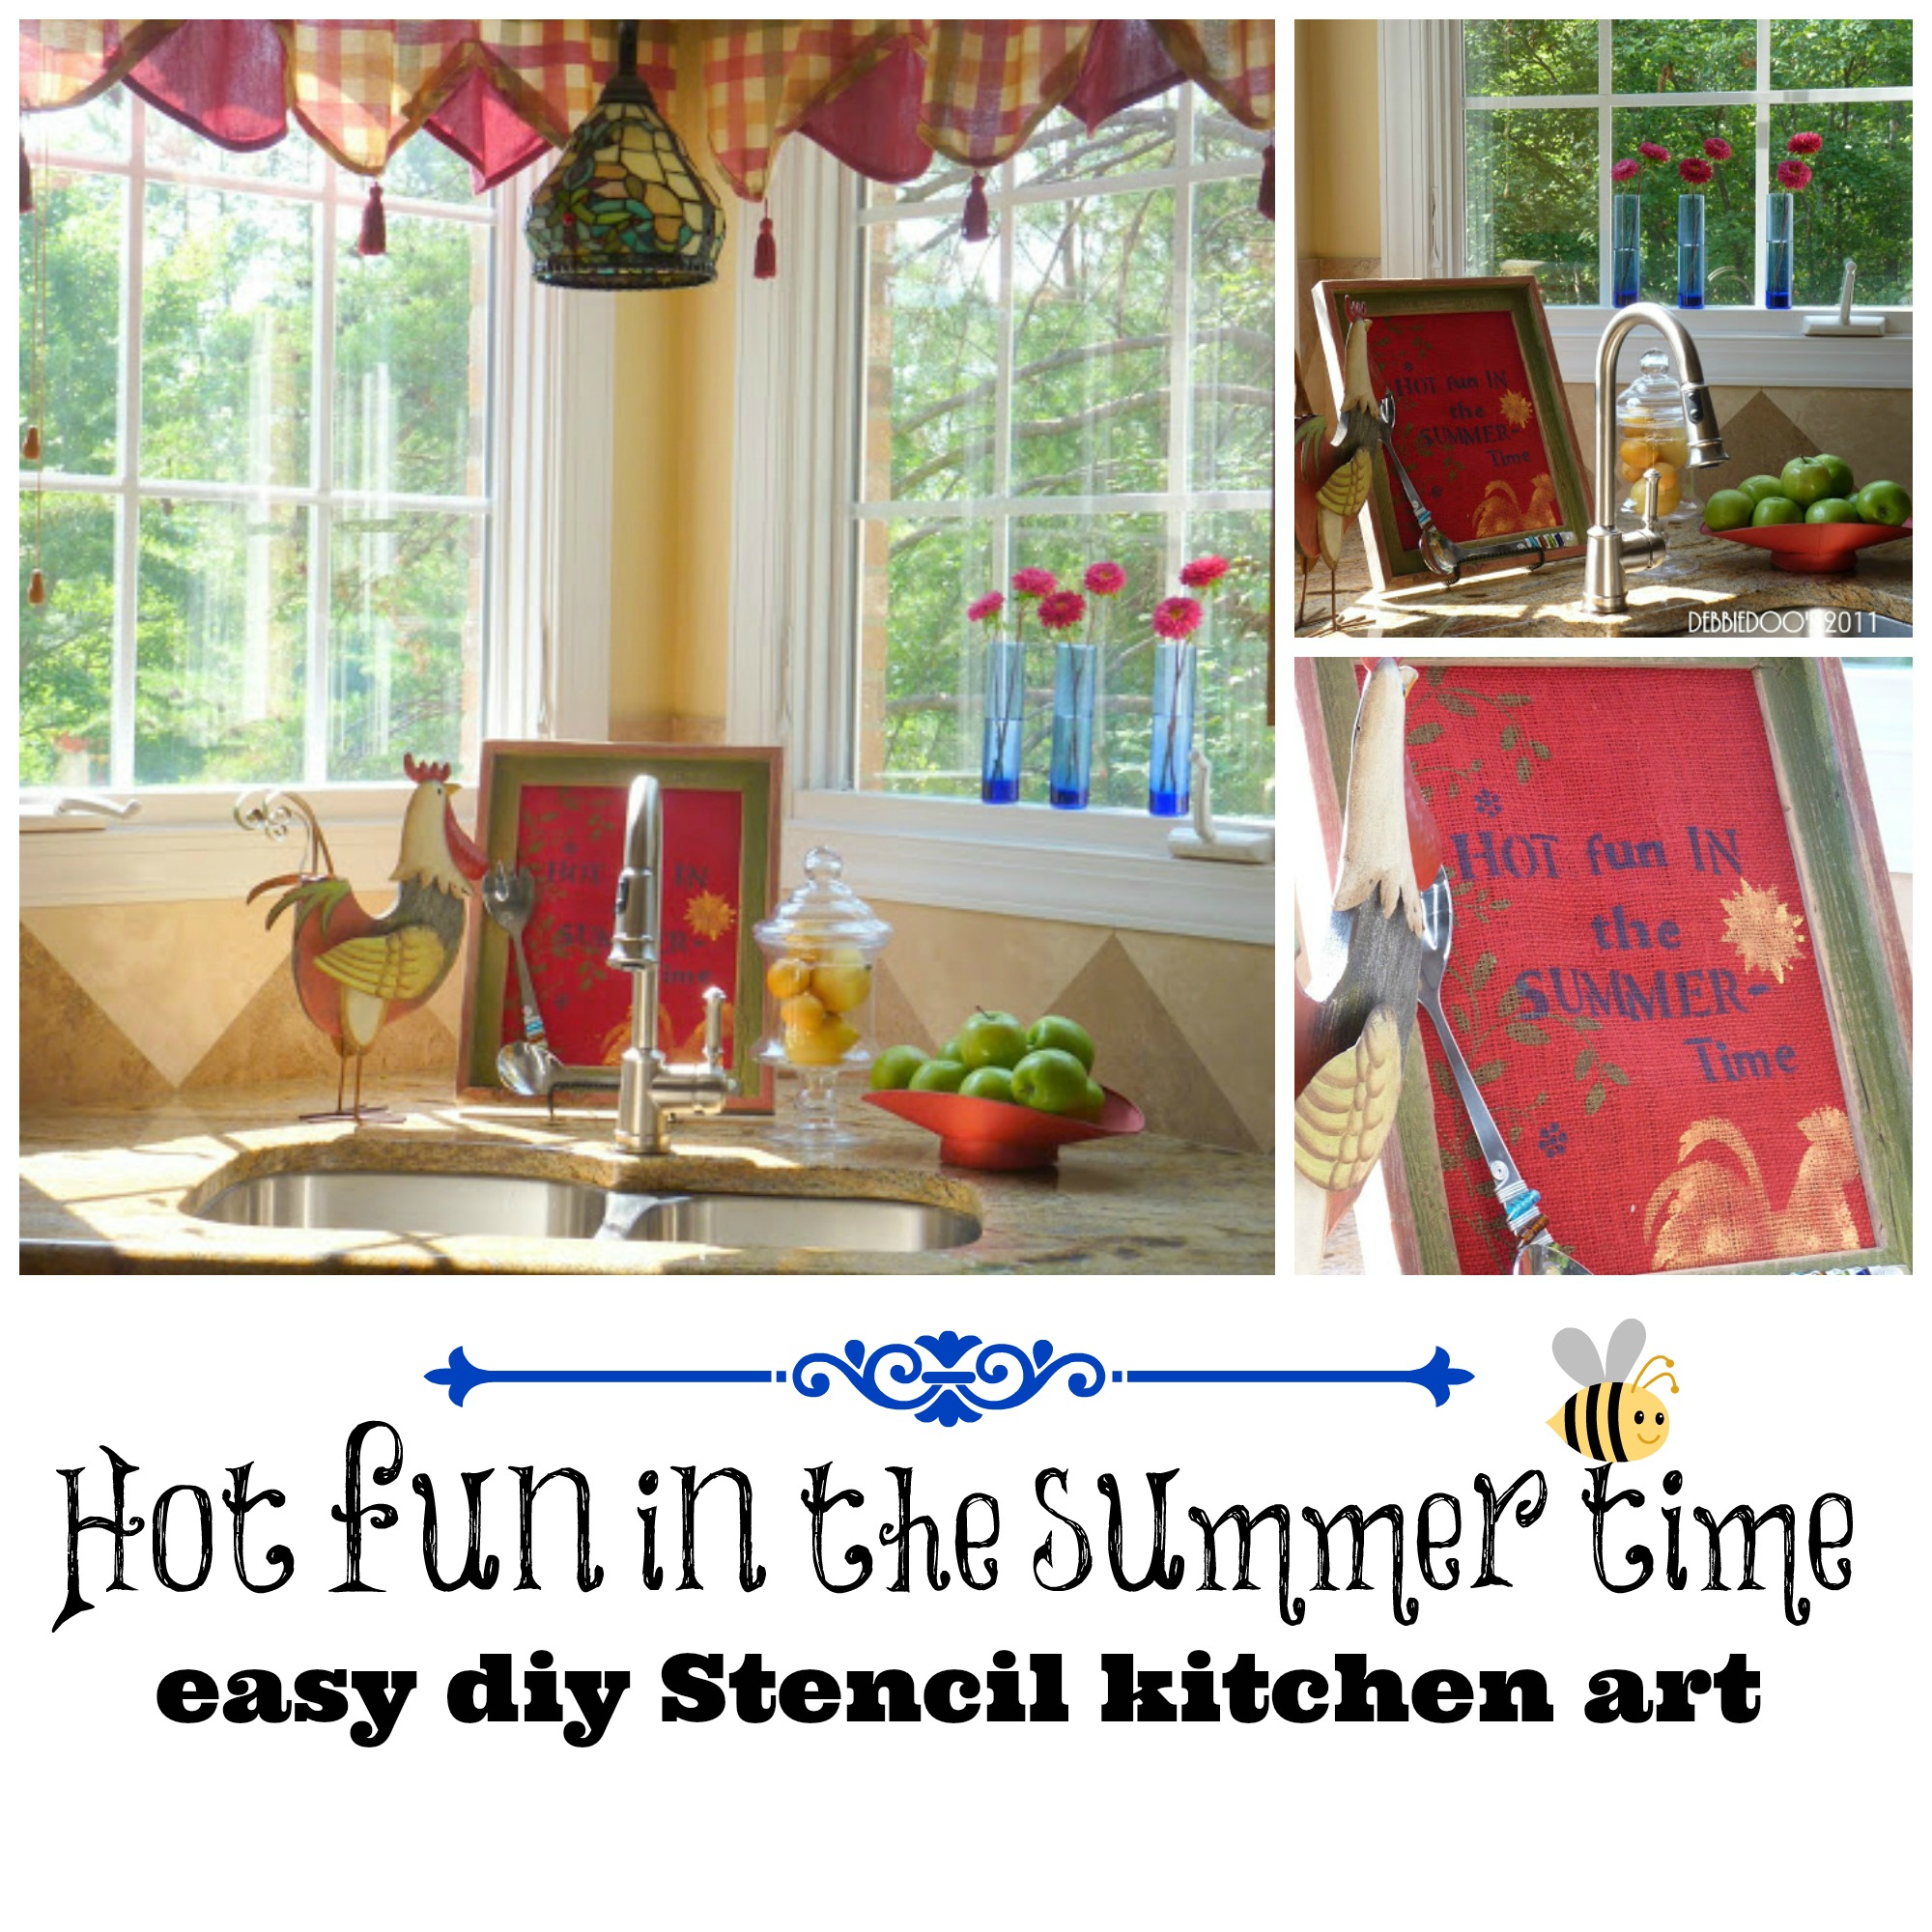 Hot fun in the summer time, easy diy kitchen art (1)